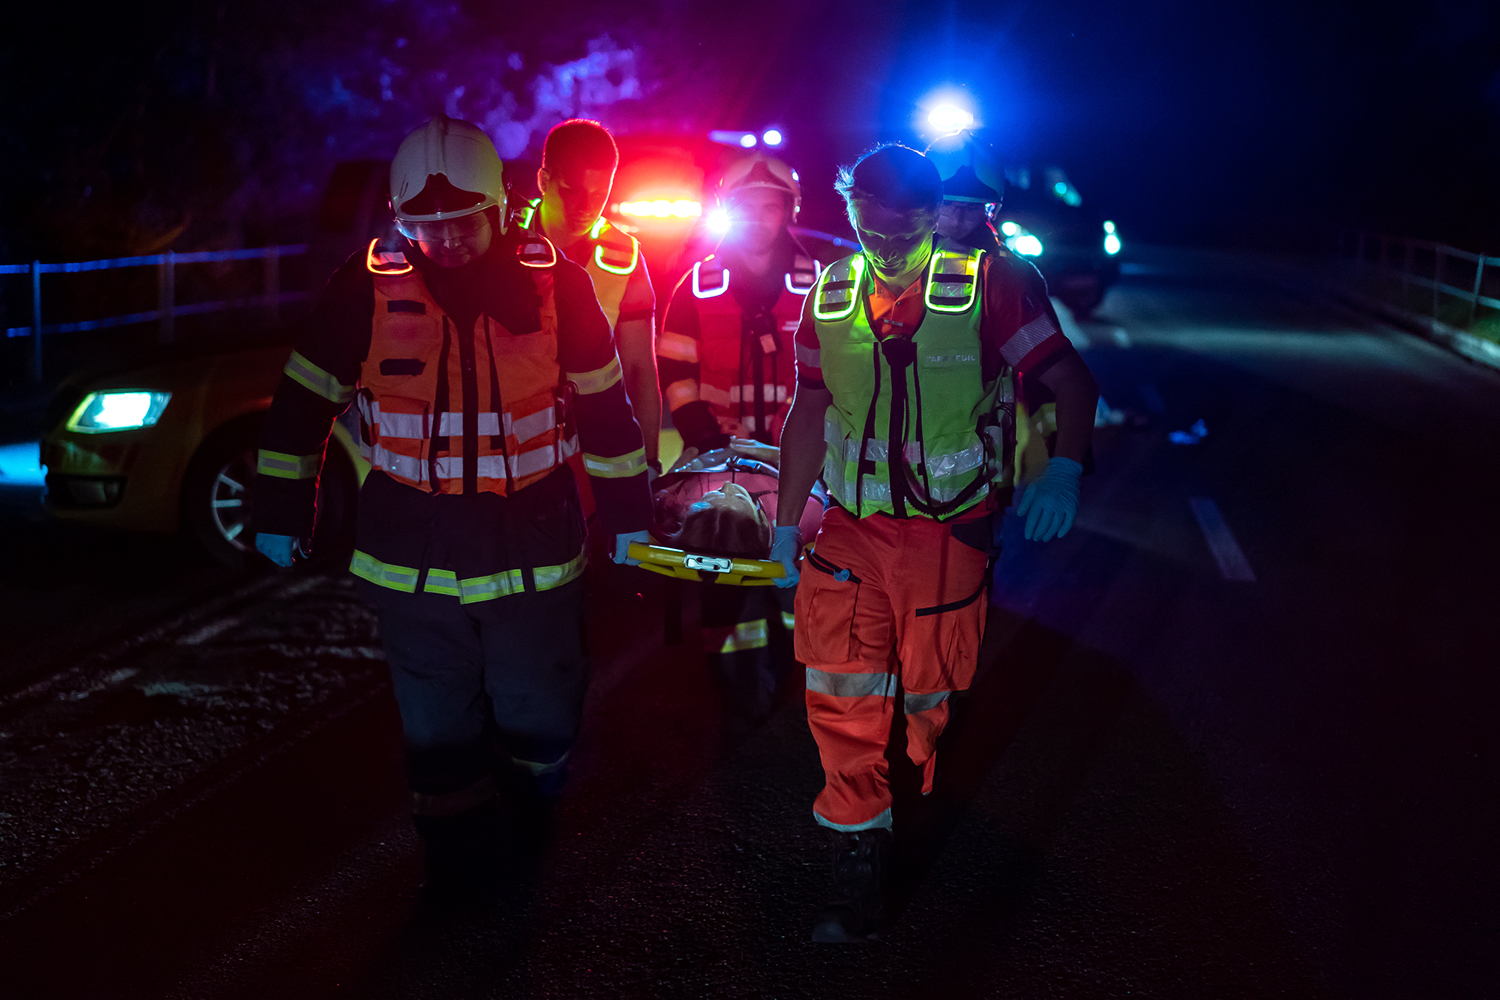 Sunfibre’s technology is ideal for those working at night, such as emergency personnel. Source: Sunfibre